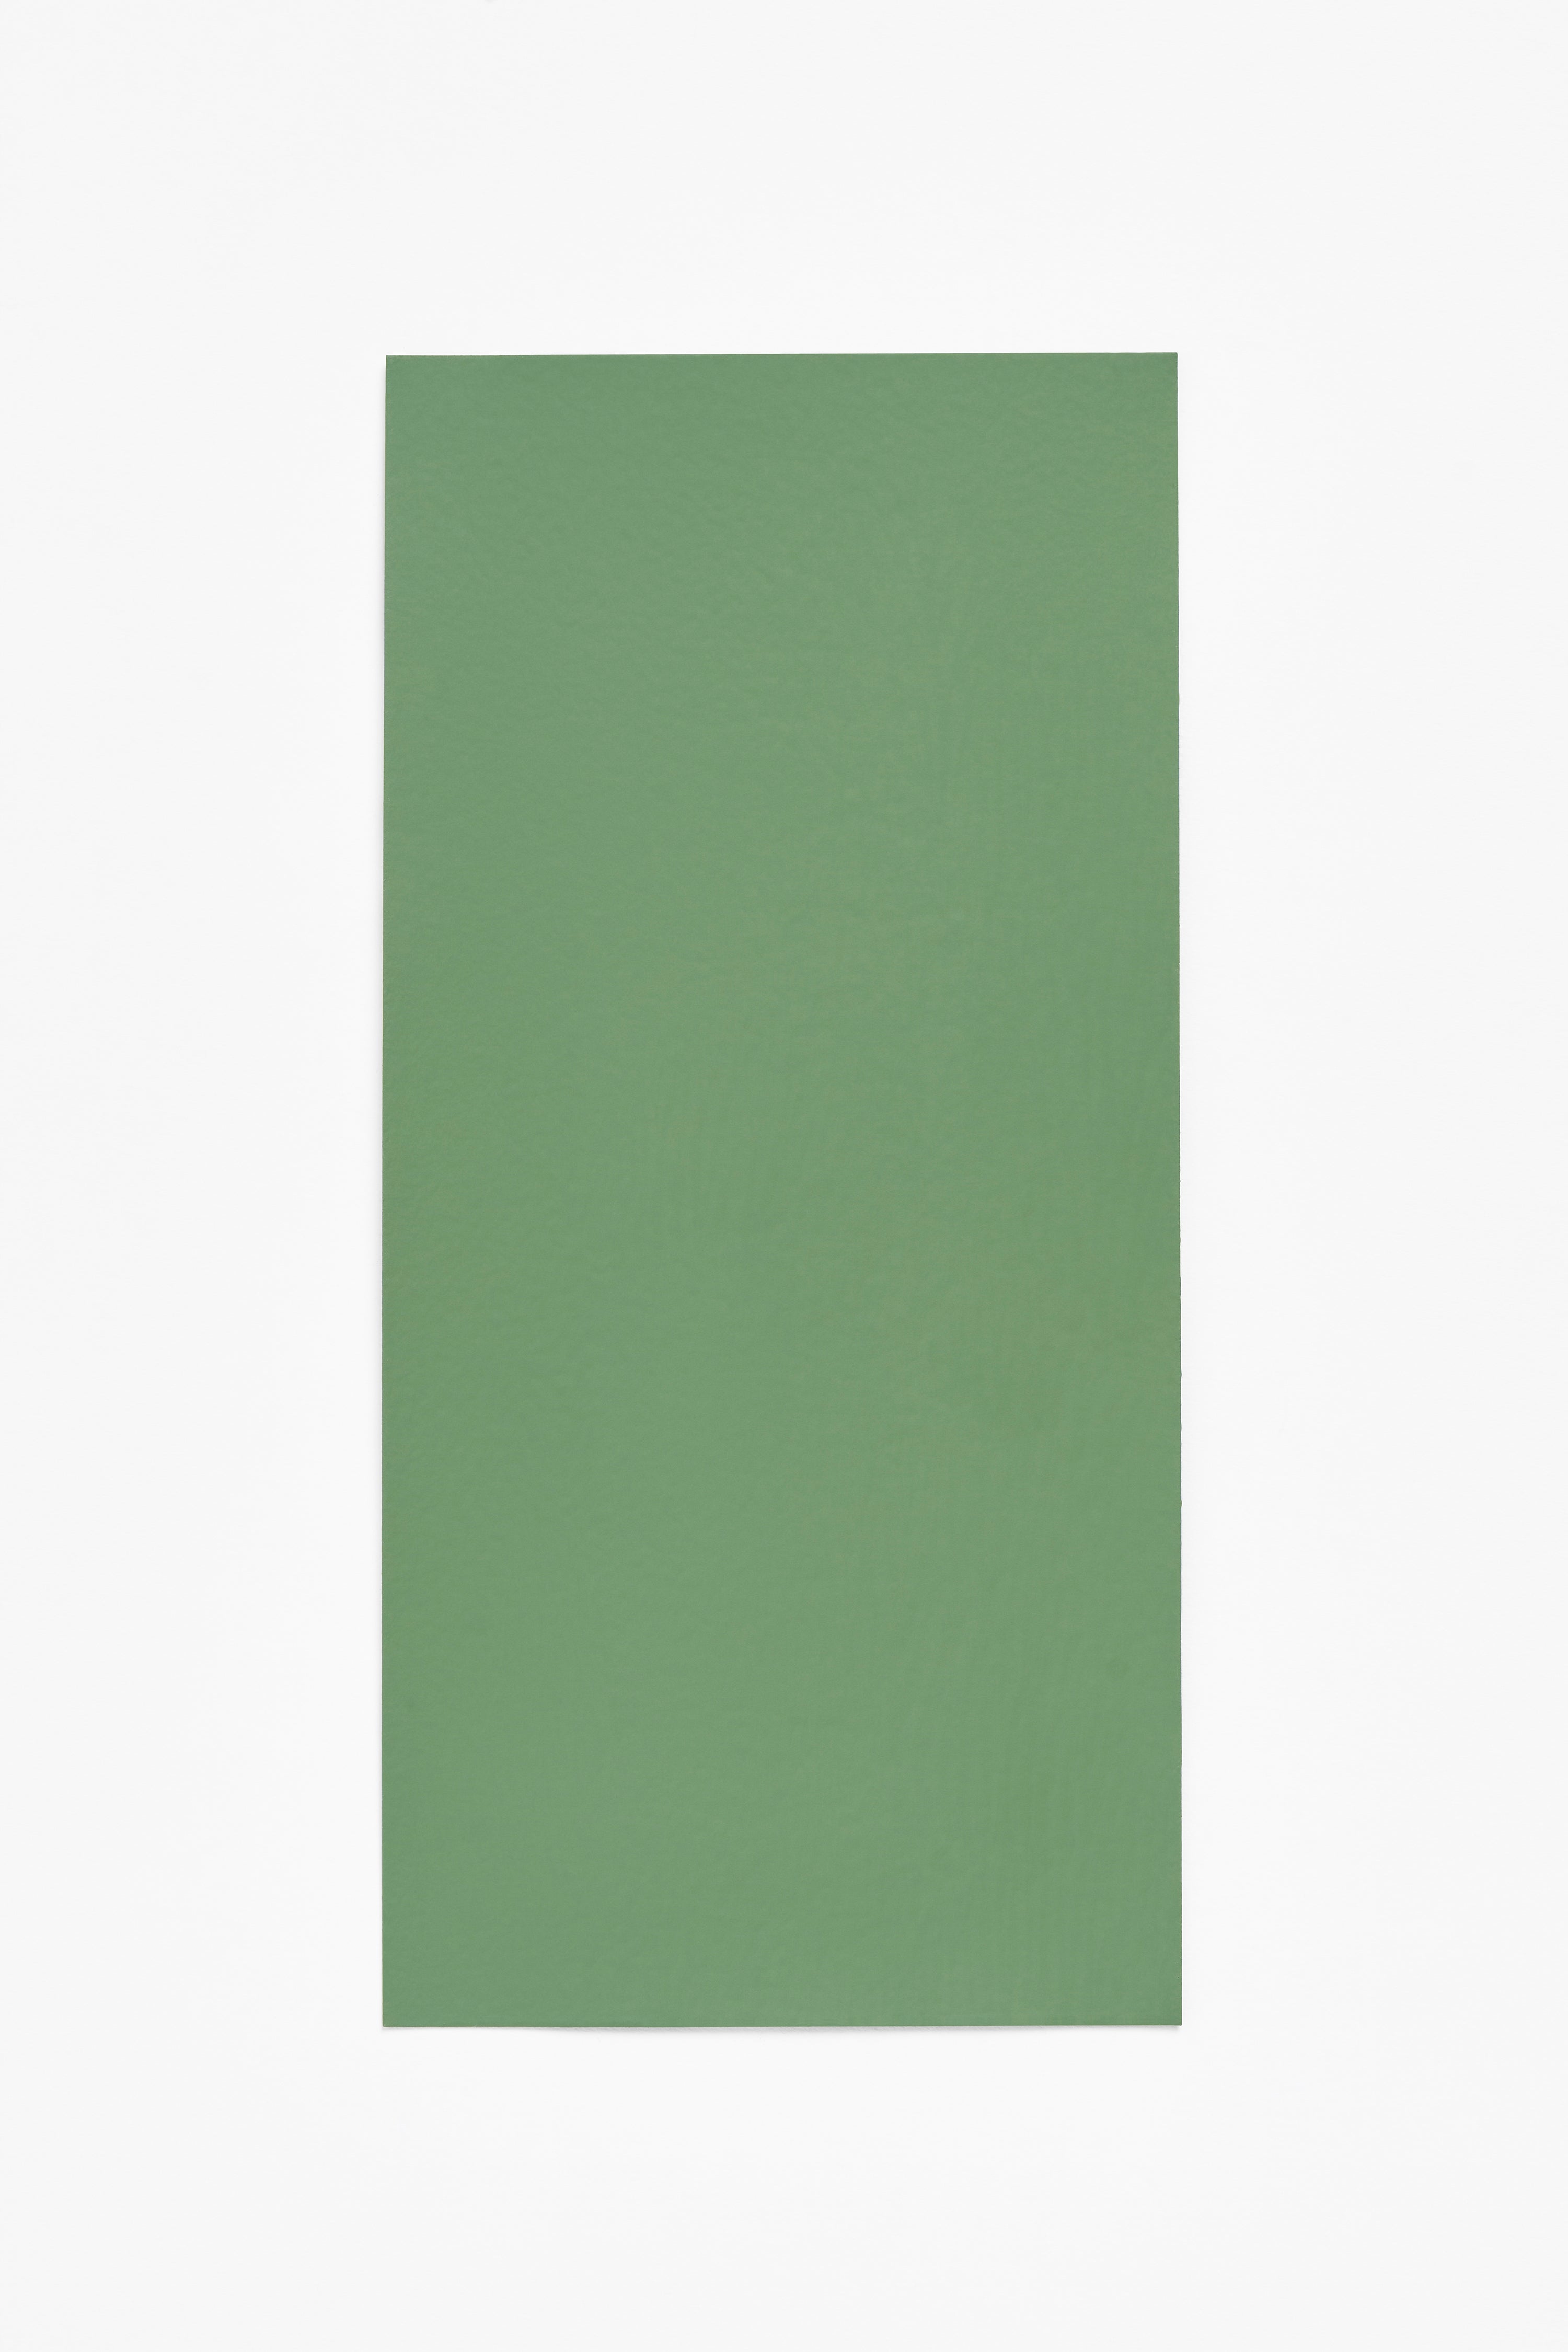 British Green — a paint colour developed by Halleroed for Blēo